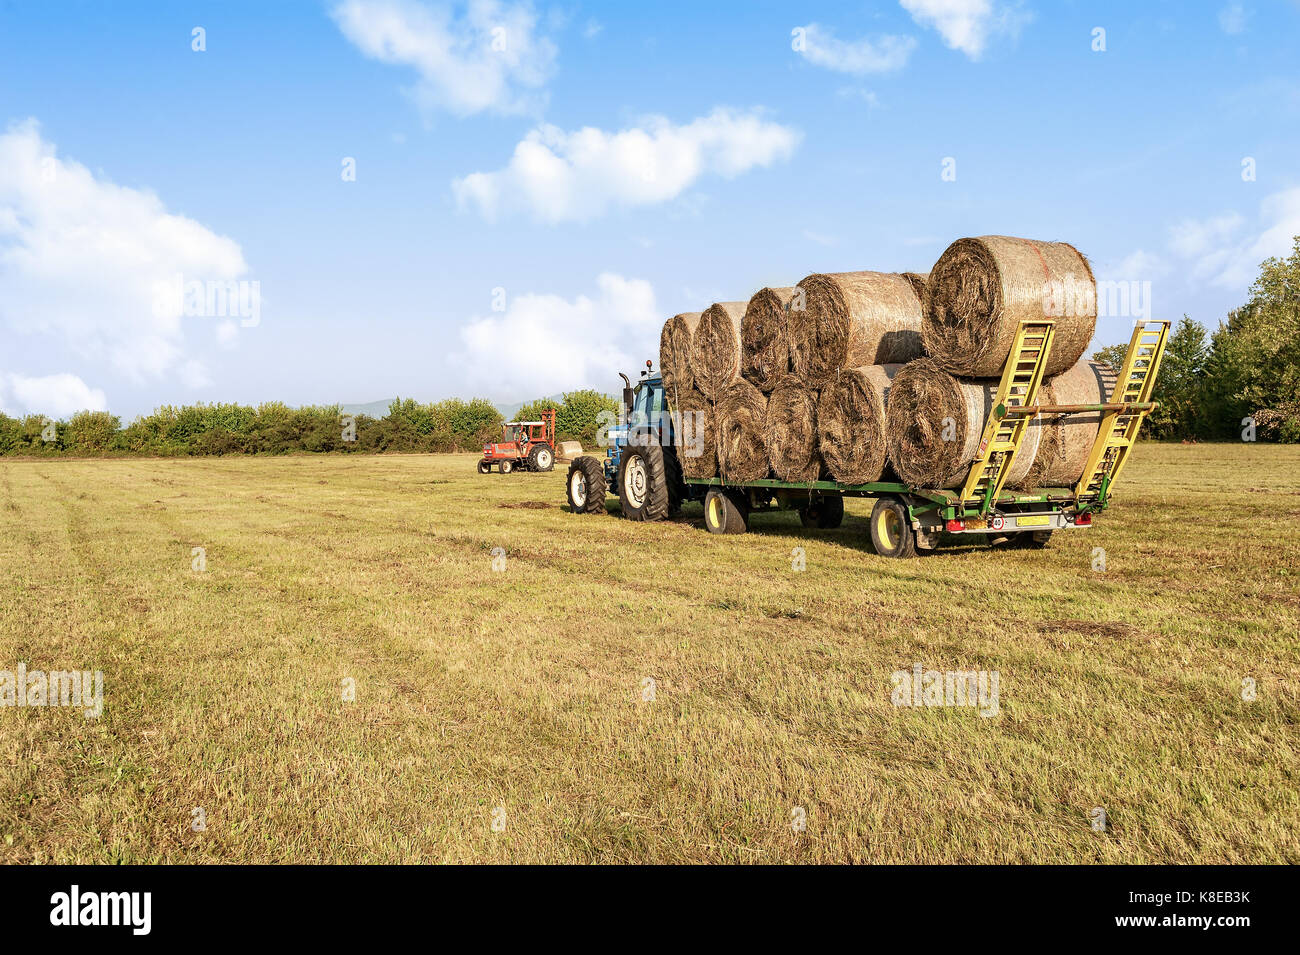 Agricultural scene. Tractor collecting hay bales in field and loading on farm wagon. Stock Photo